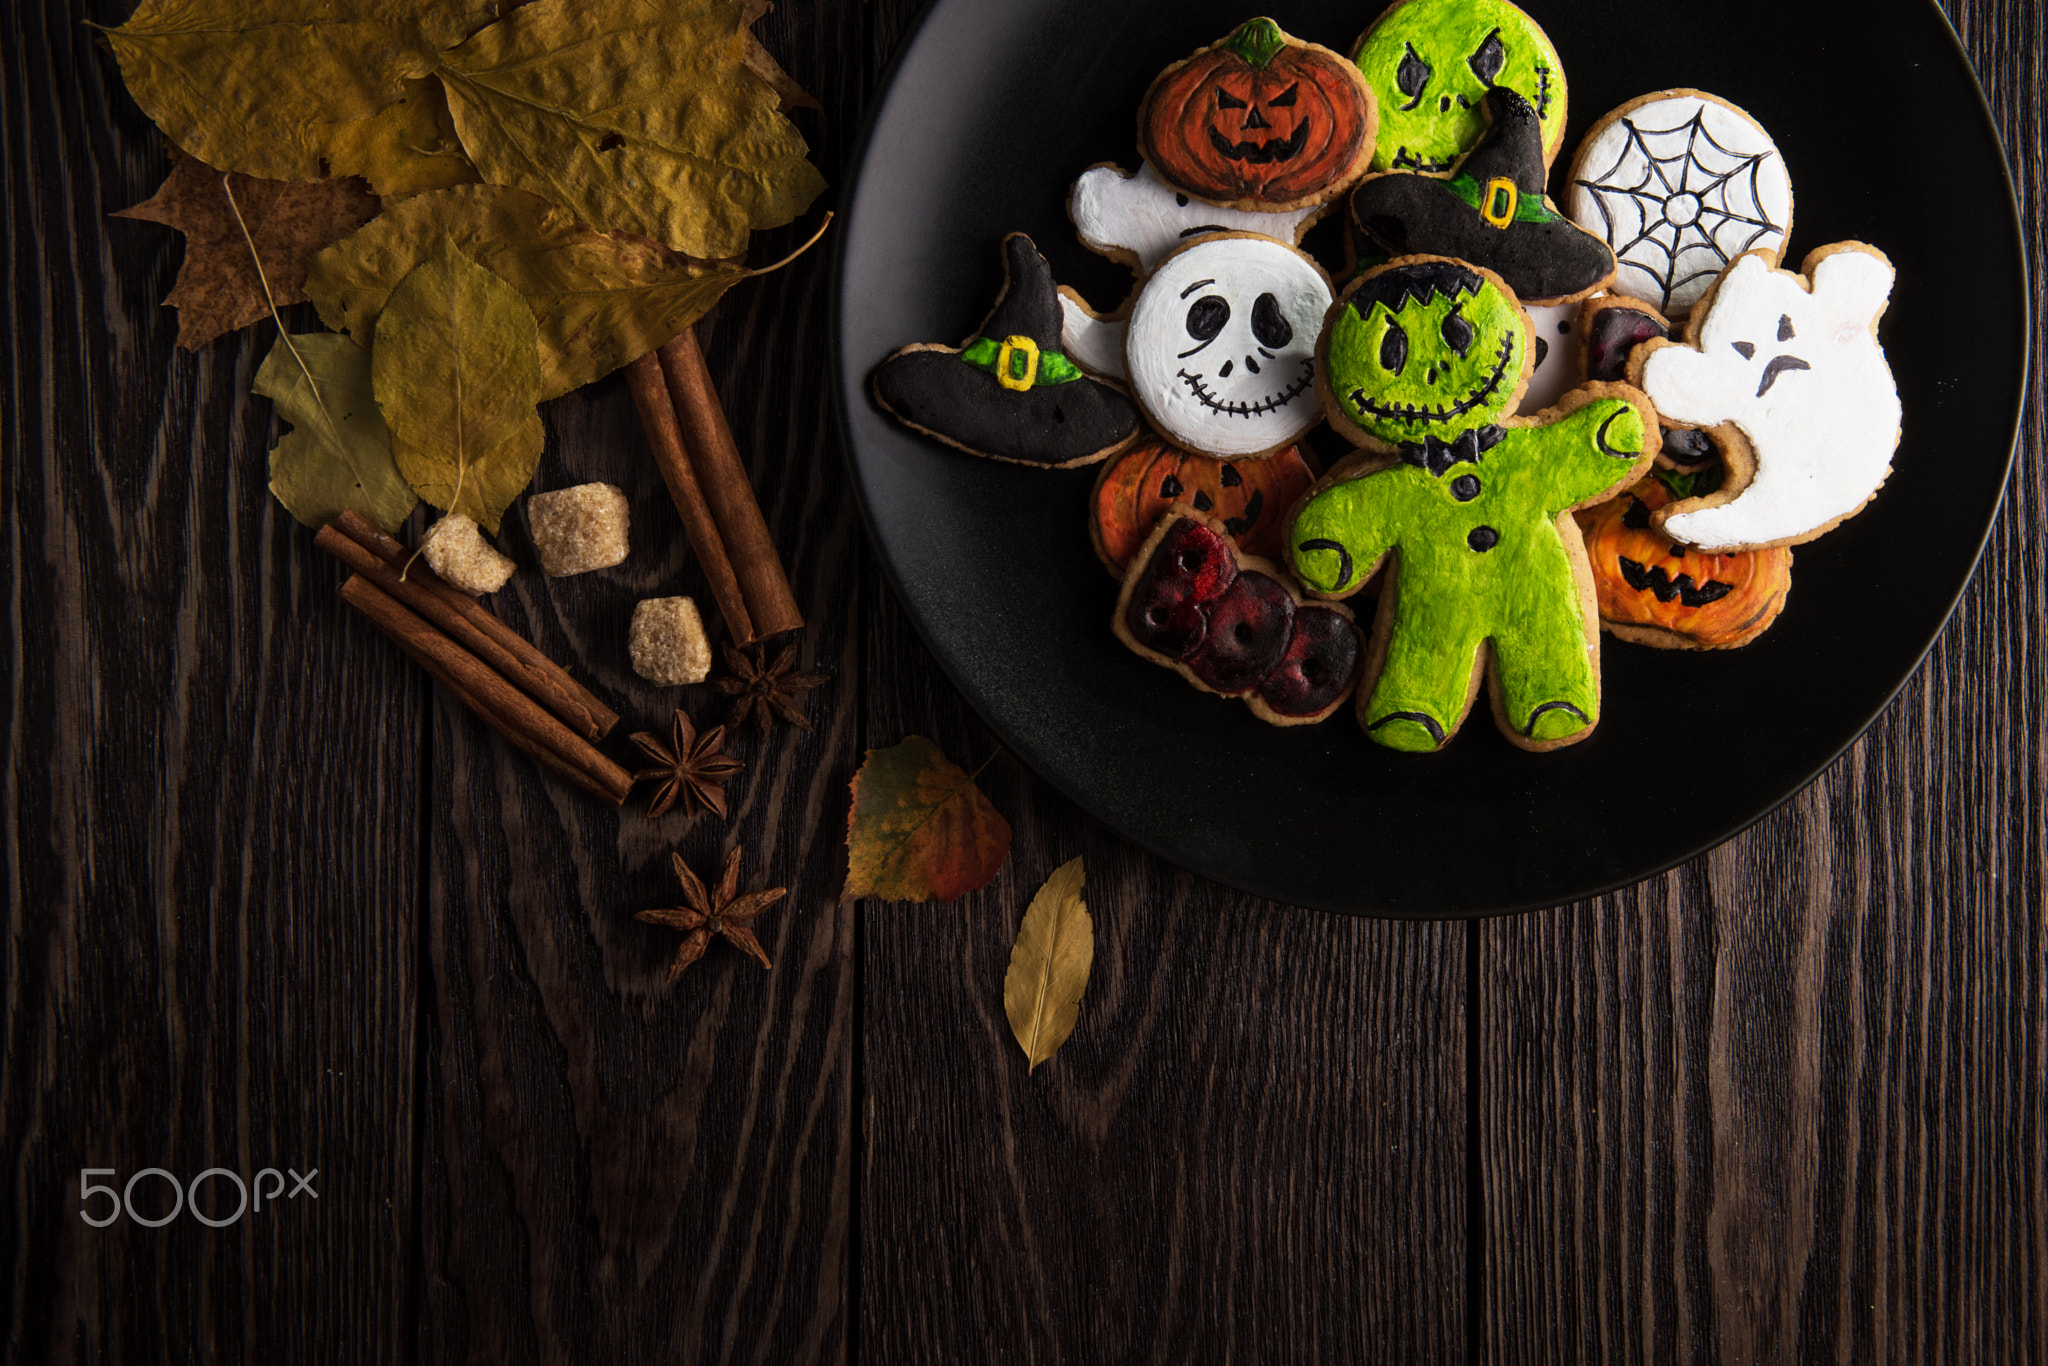 General 2048x1366 Halloween sweets biscuit food 500px watermarked closeup wooden surface bowls top view cinnamon